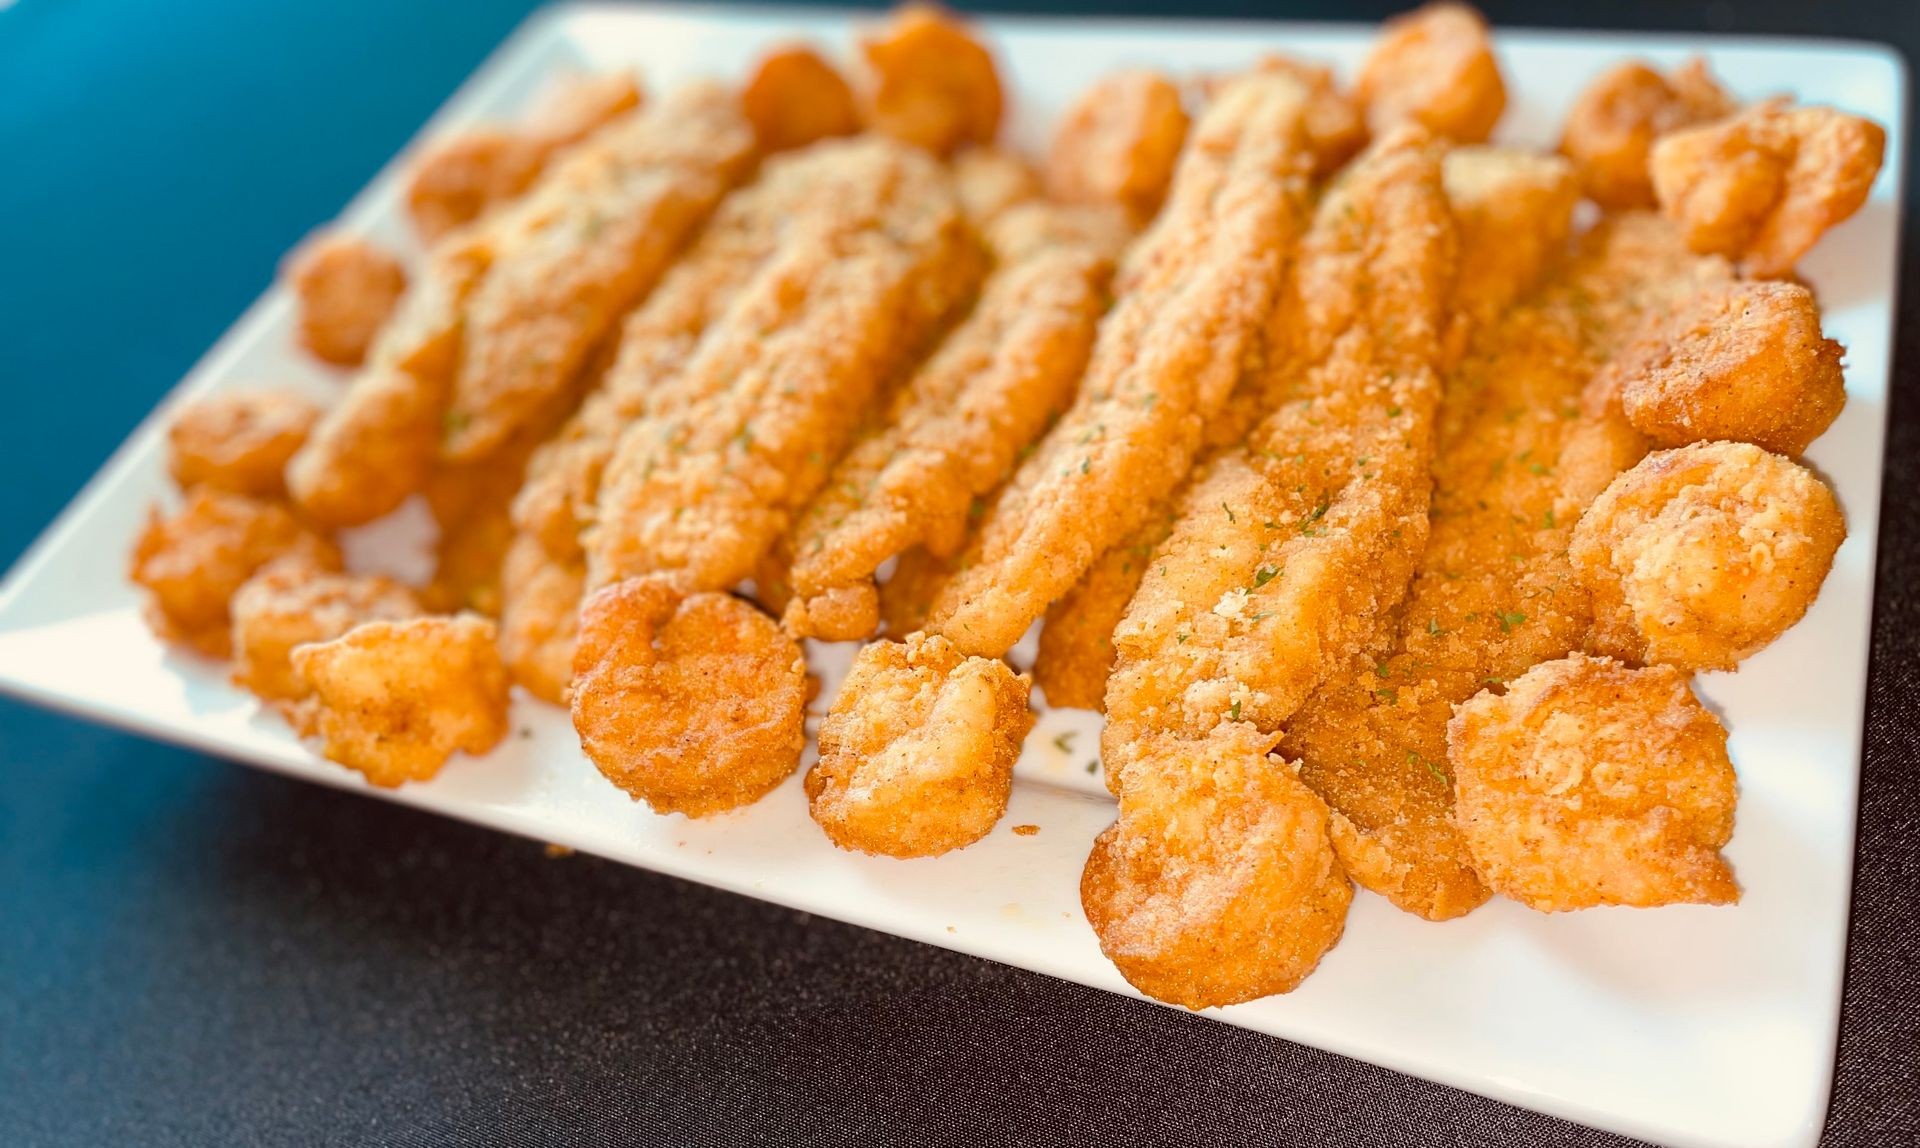 Flavorful Fried Shrimp and Fish: Irresistible Delights!